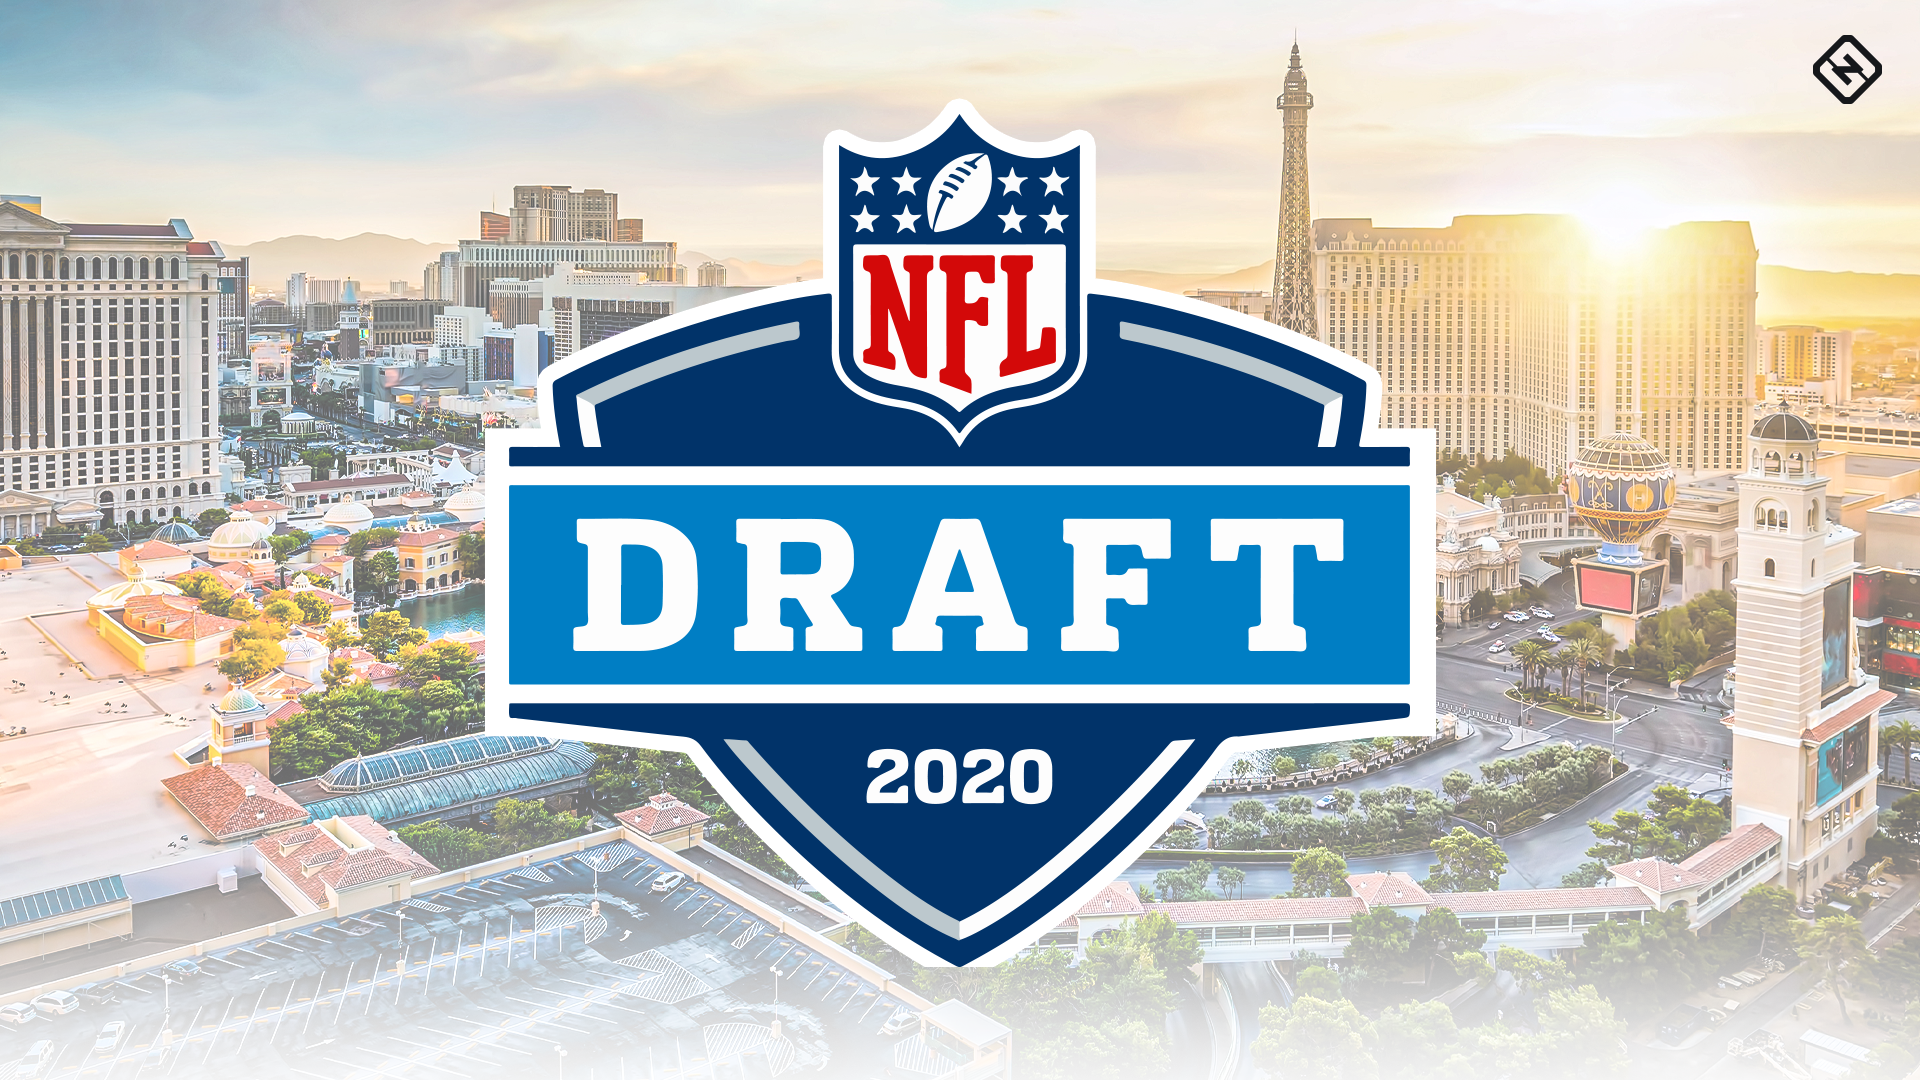 2020 NFL Draft to be Conducted Virtually